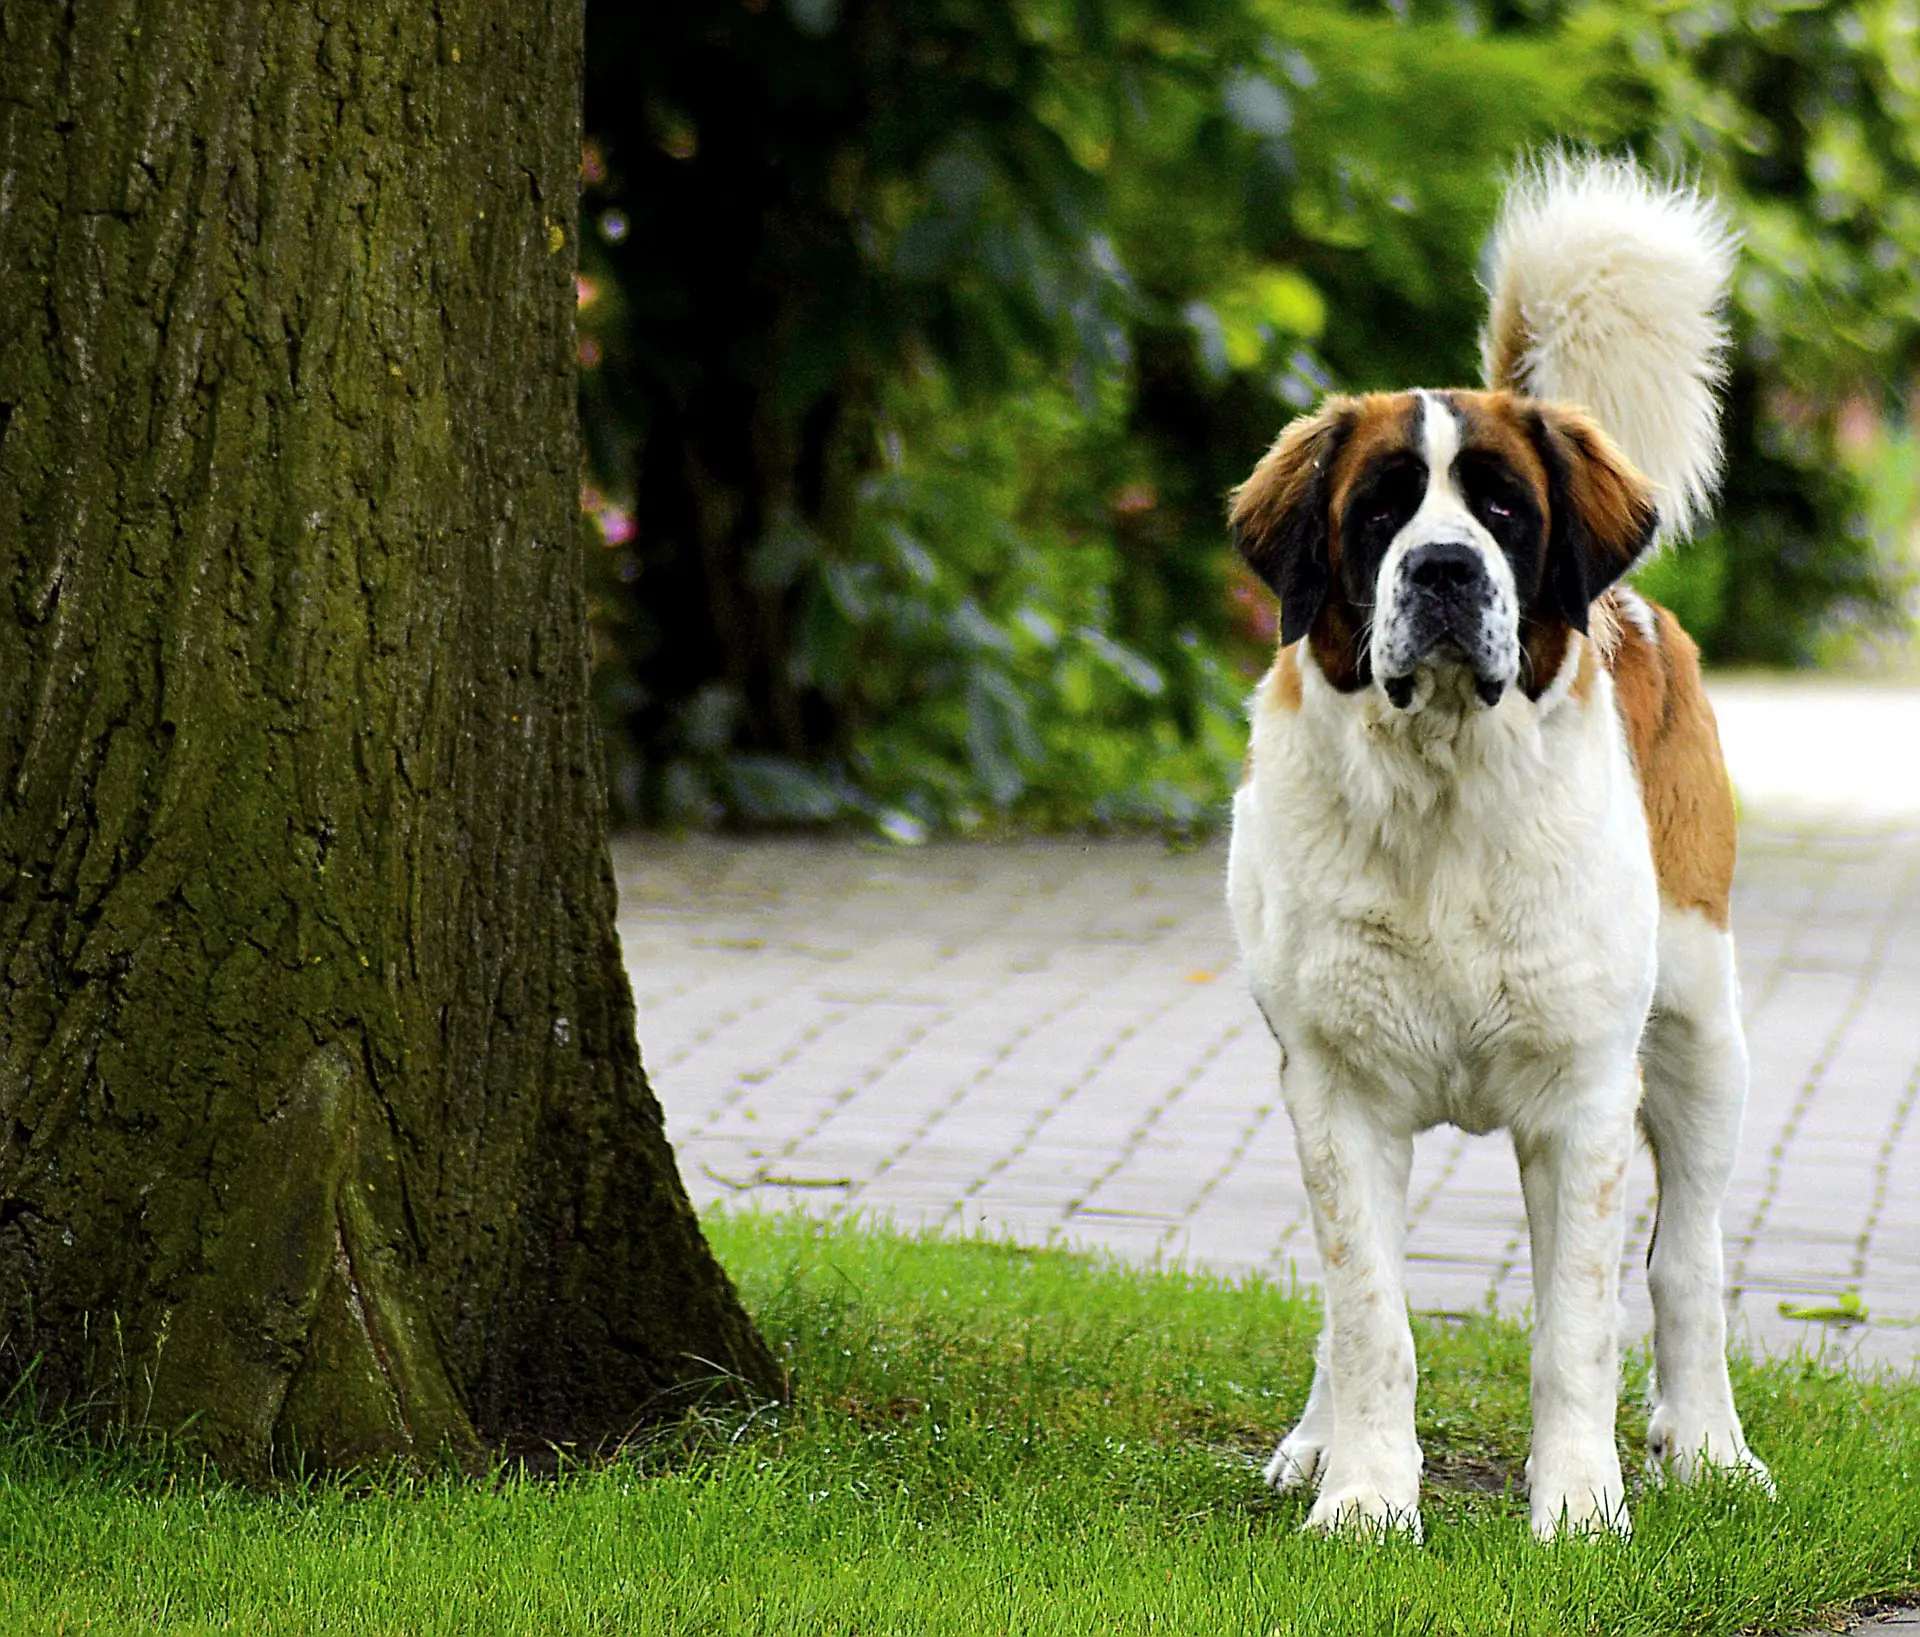 Find Out Why Is The Saint Bernard Dog Also Called The Gentle Giant